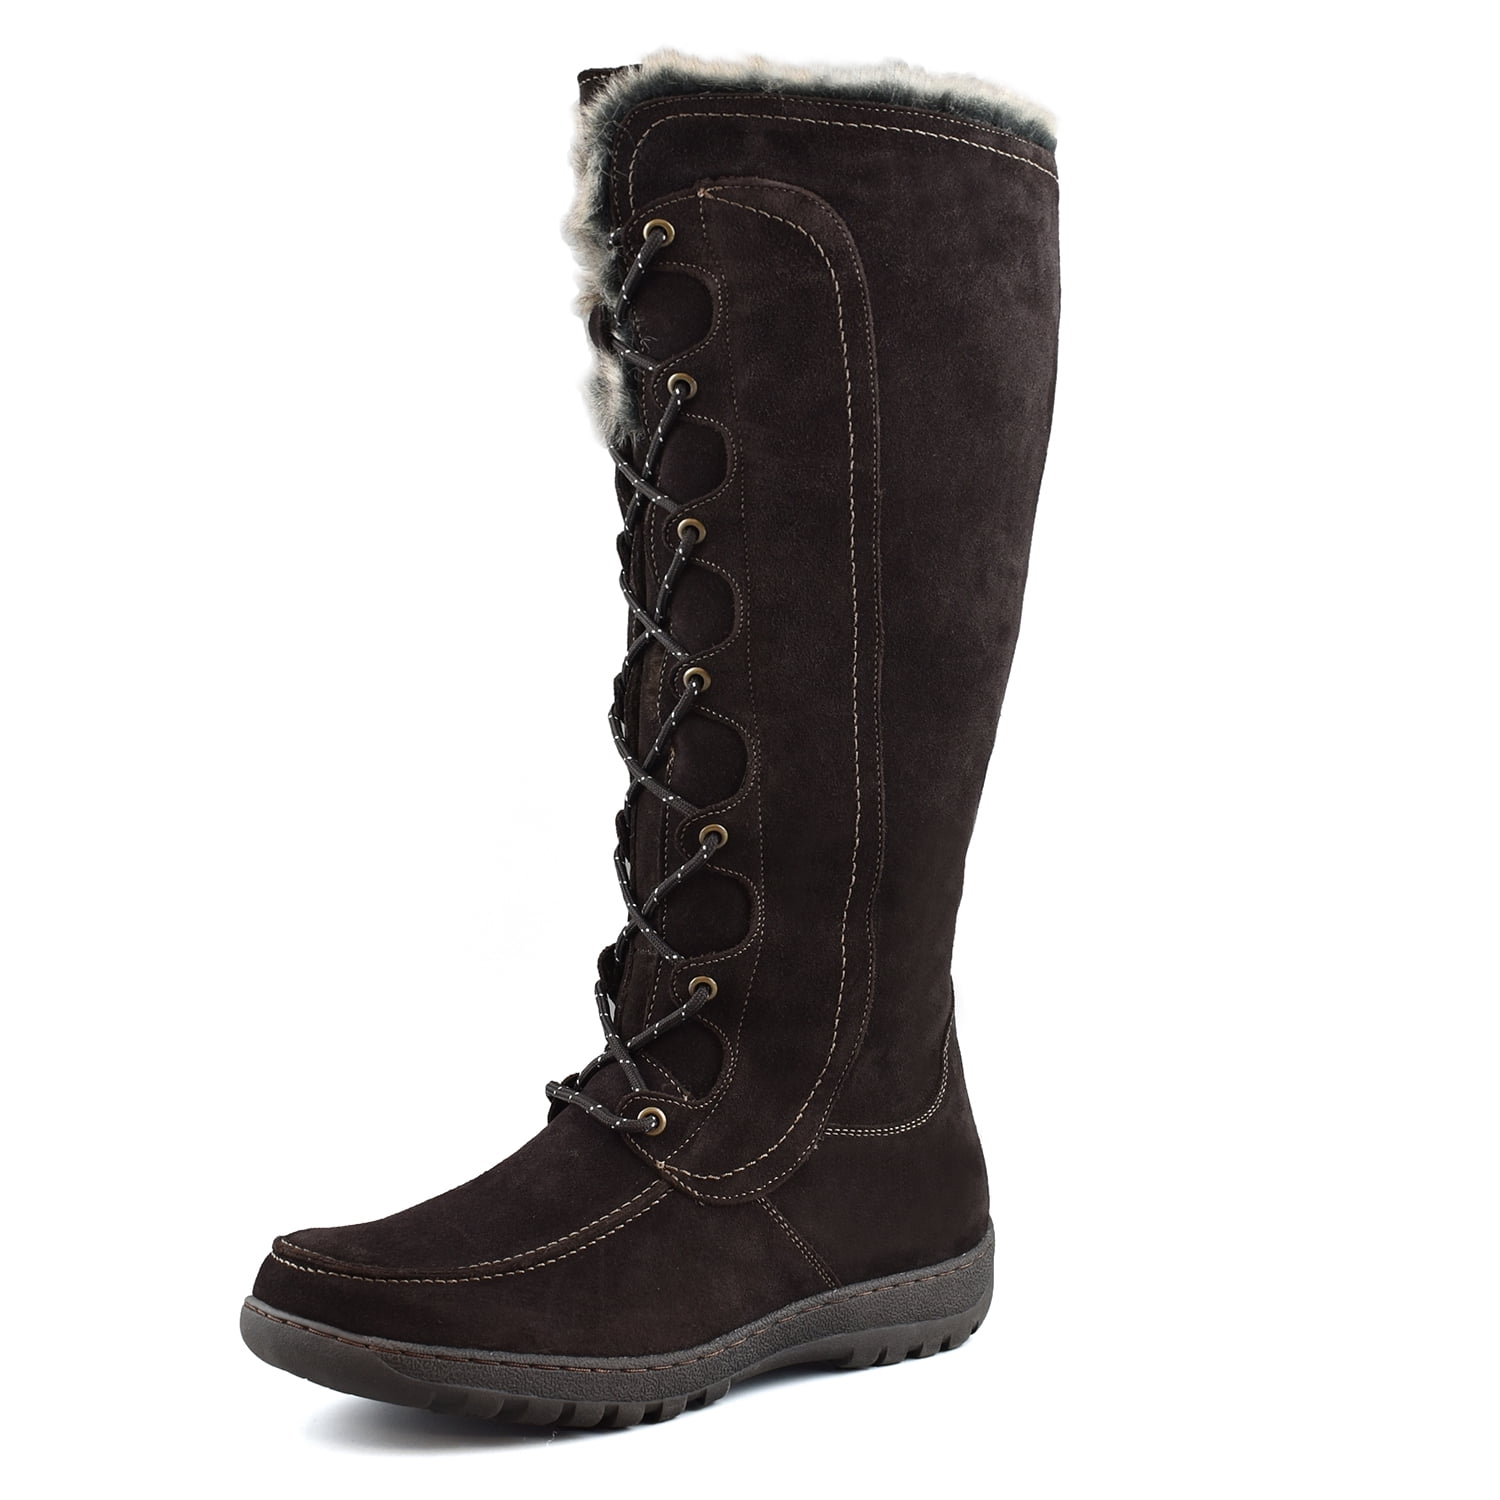 Comfy Moda Women's Tall Snow Winter Boots | Suede Leather | Fur Lined ...